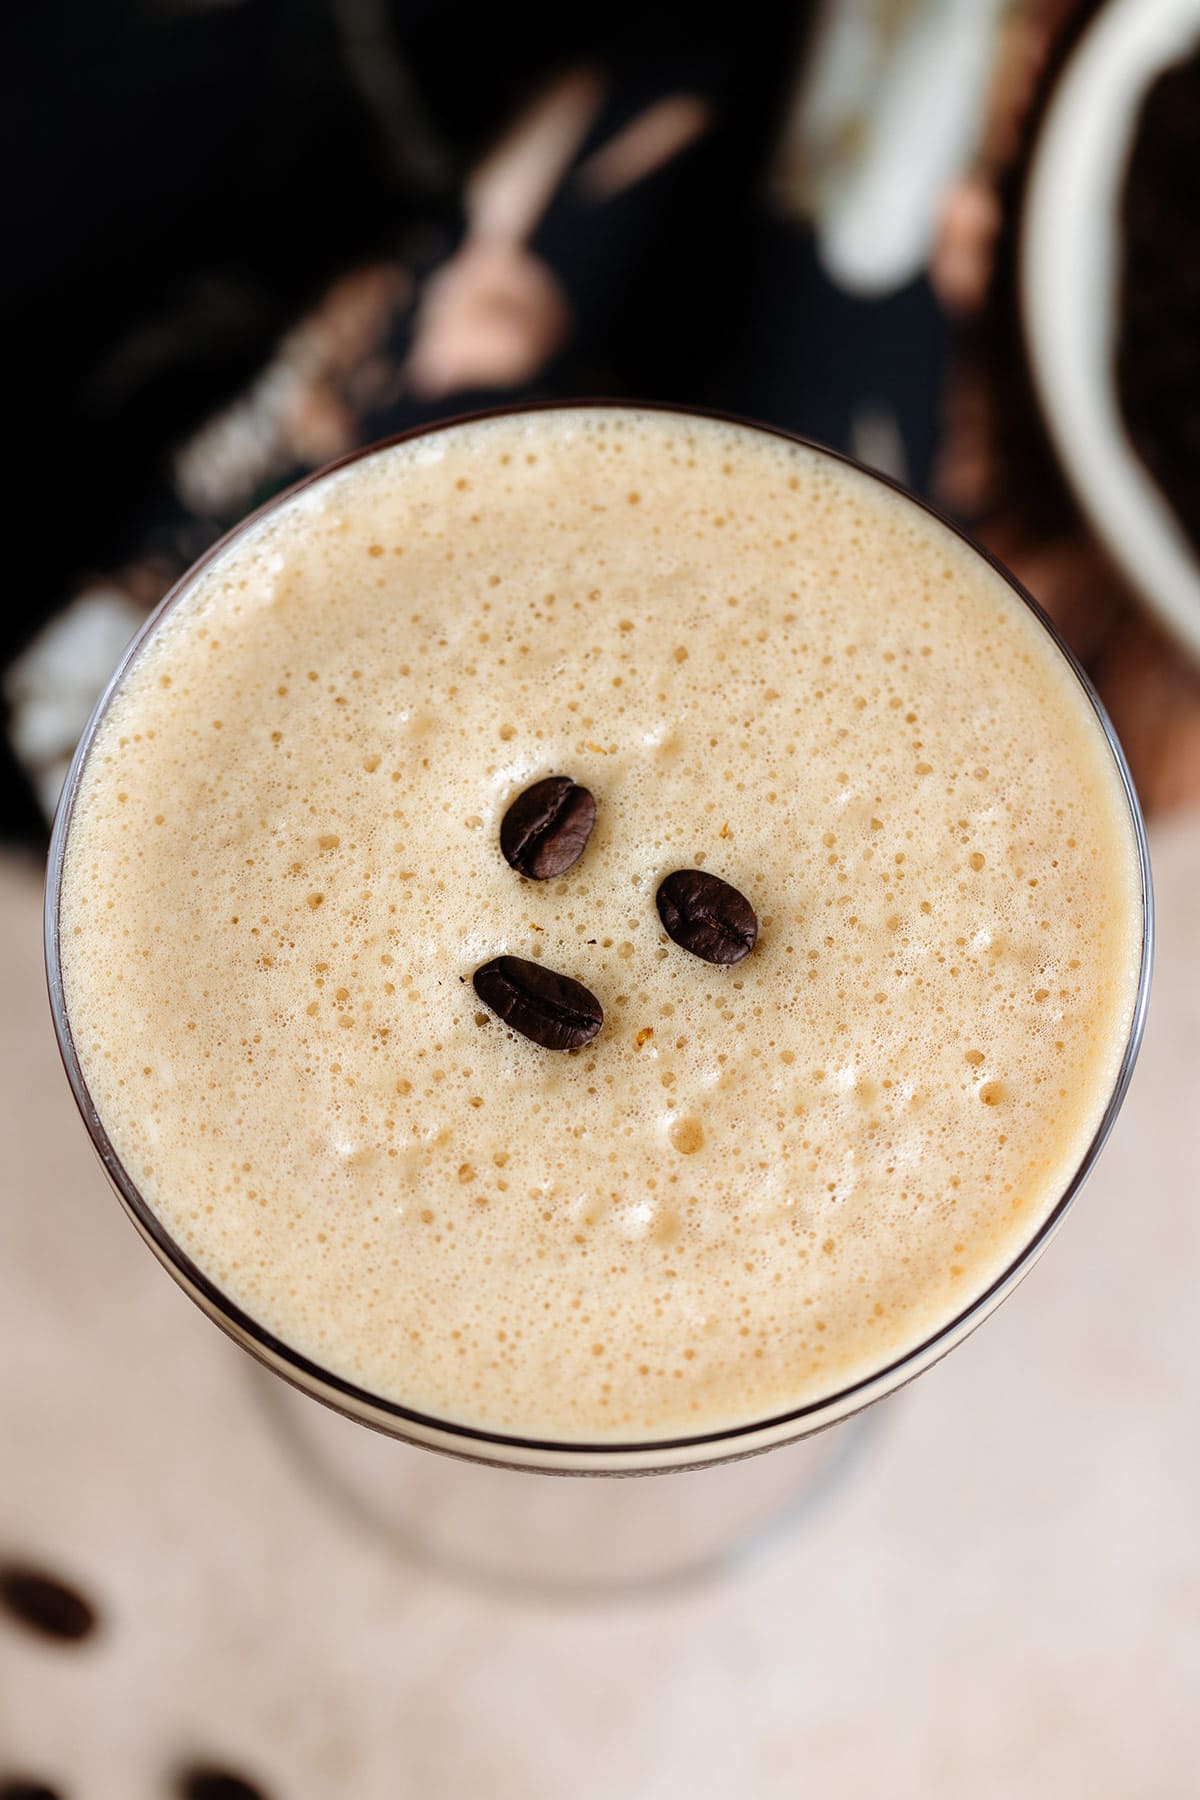 An espresso martini shot from above showing lots of coffee foam garnished with three coffee beans.